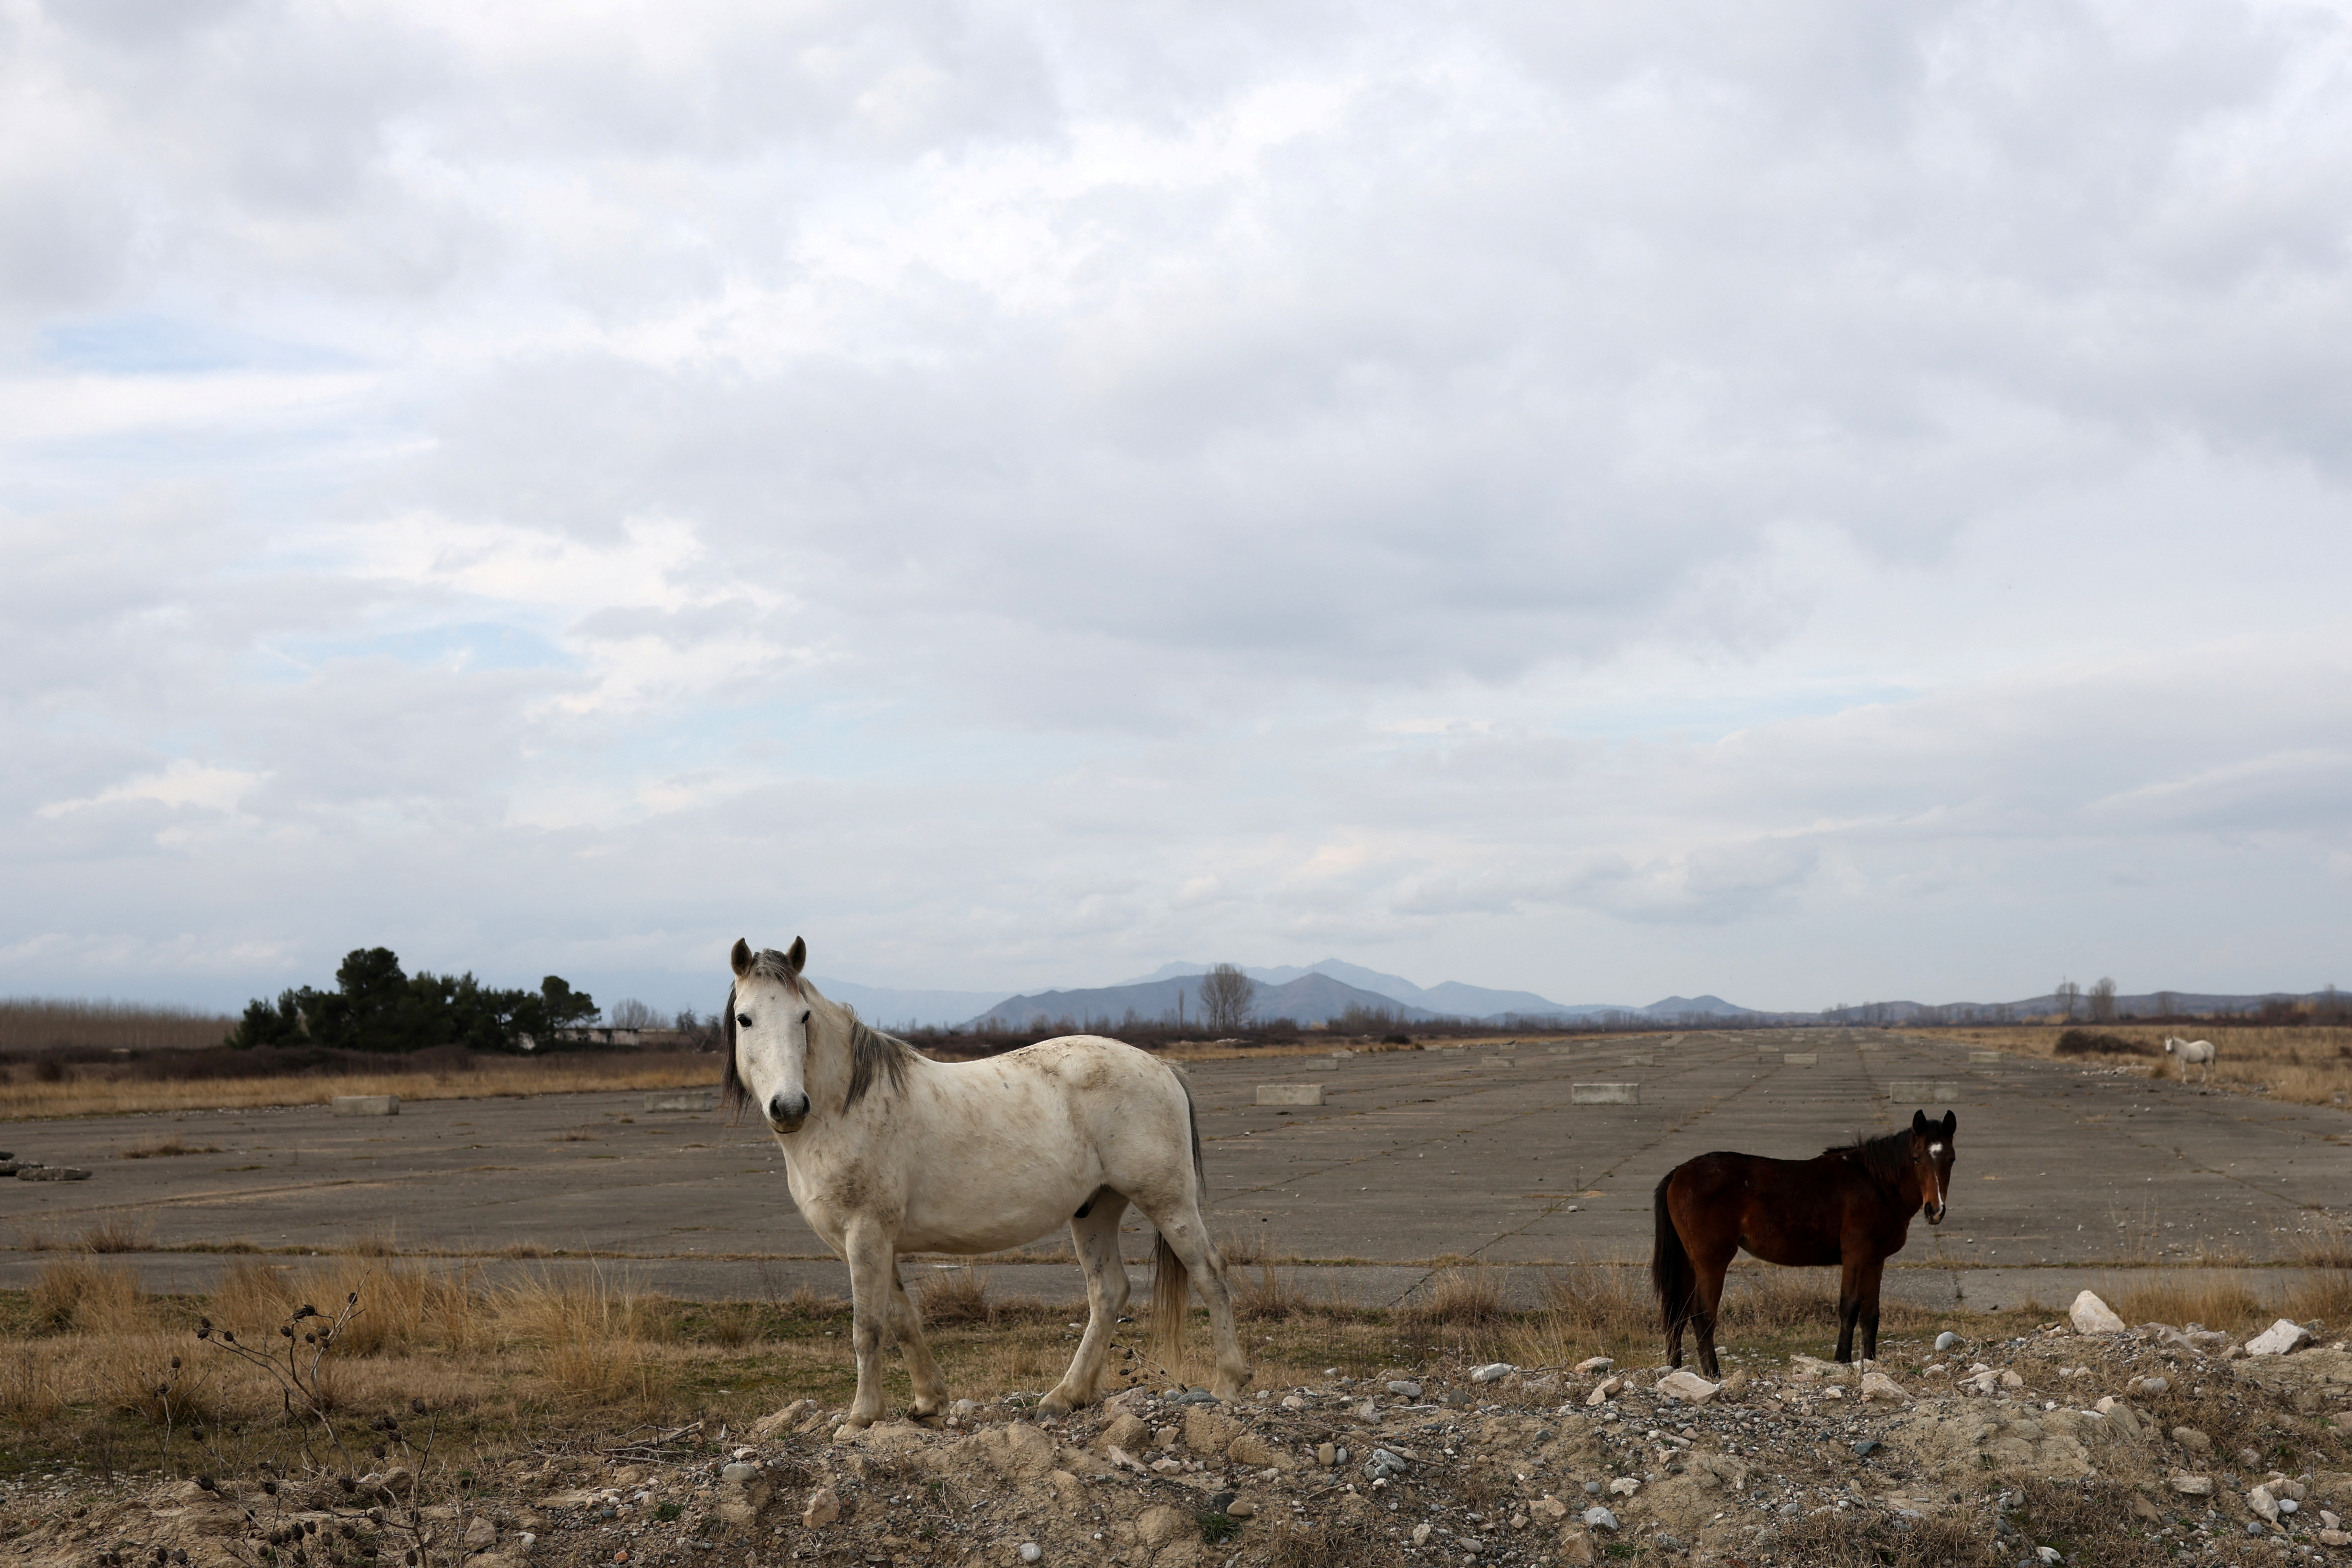 Horses stand next to a former runaway of a military airport, now used as a road, in Gjader